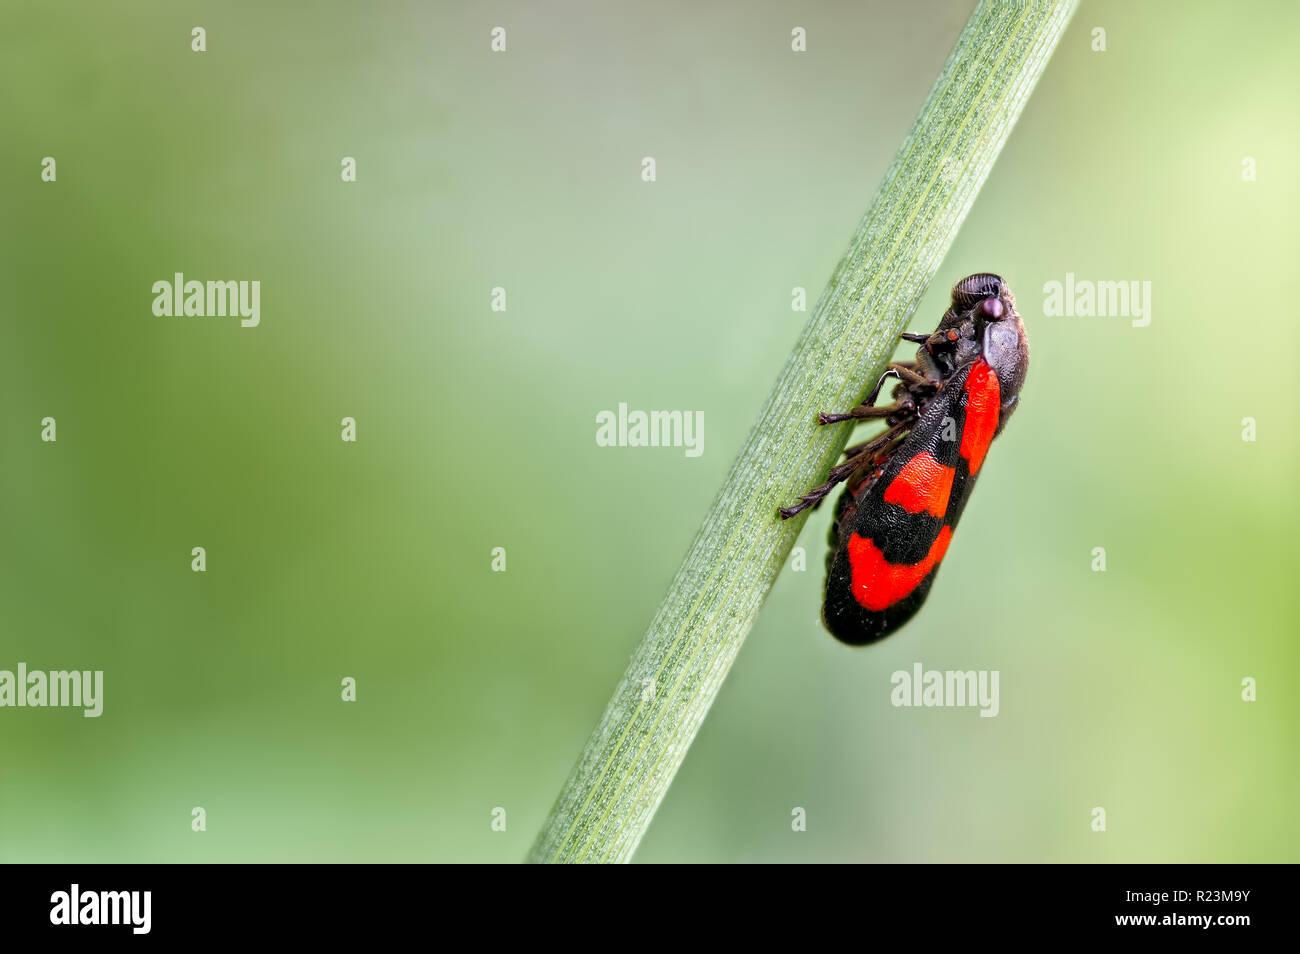 A photograph of a true bug known as a Froghopper on a rush (Juncus) stem. This Froghopper is the Red & Black Froghopper known as Cercopis vulnerata. Stock Photo